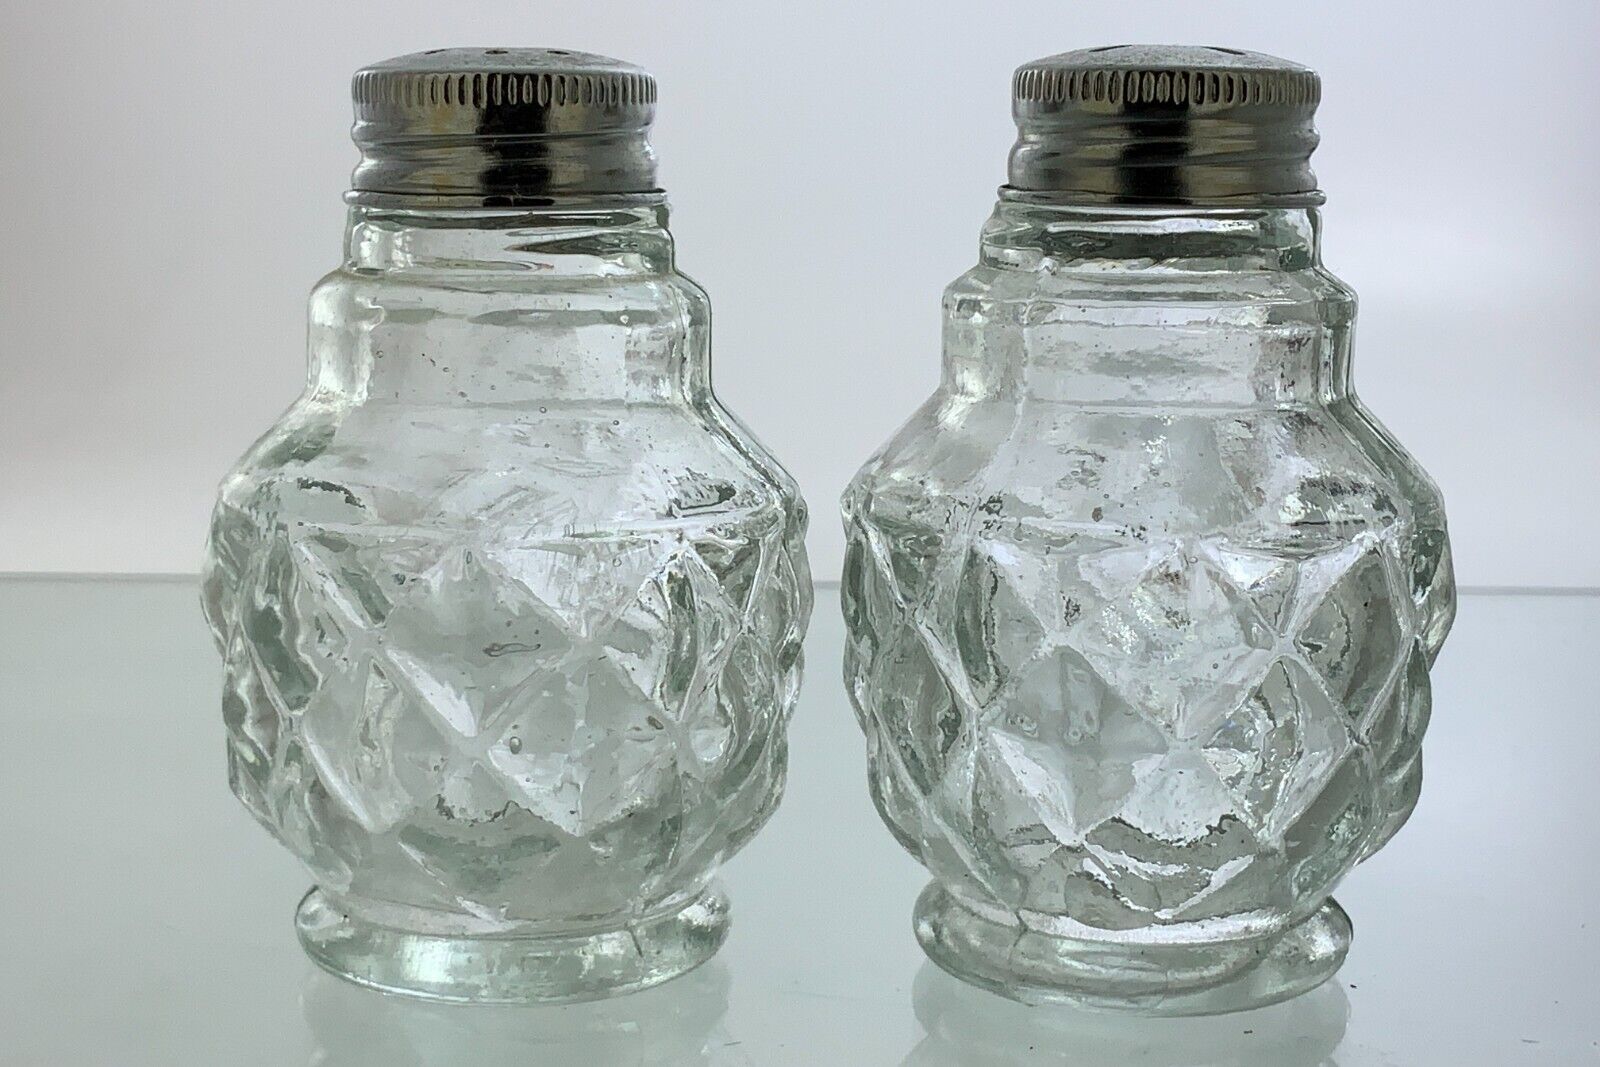 Vintage Clear Glass Metal Lid Salt and Pepper Shakers Z552